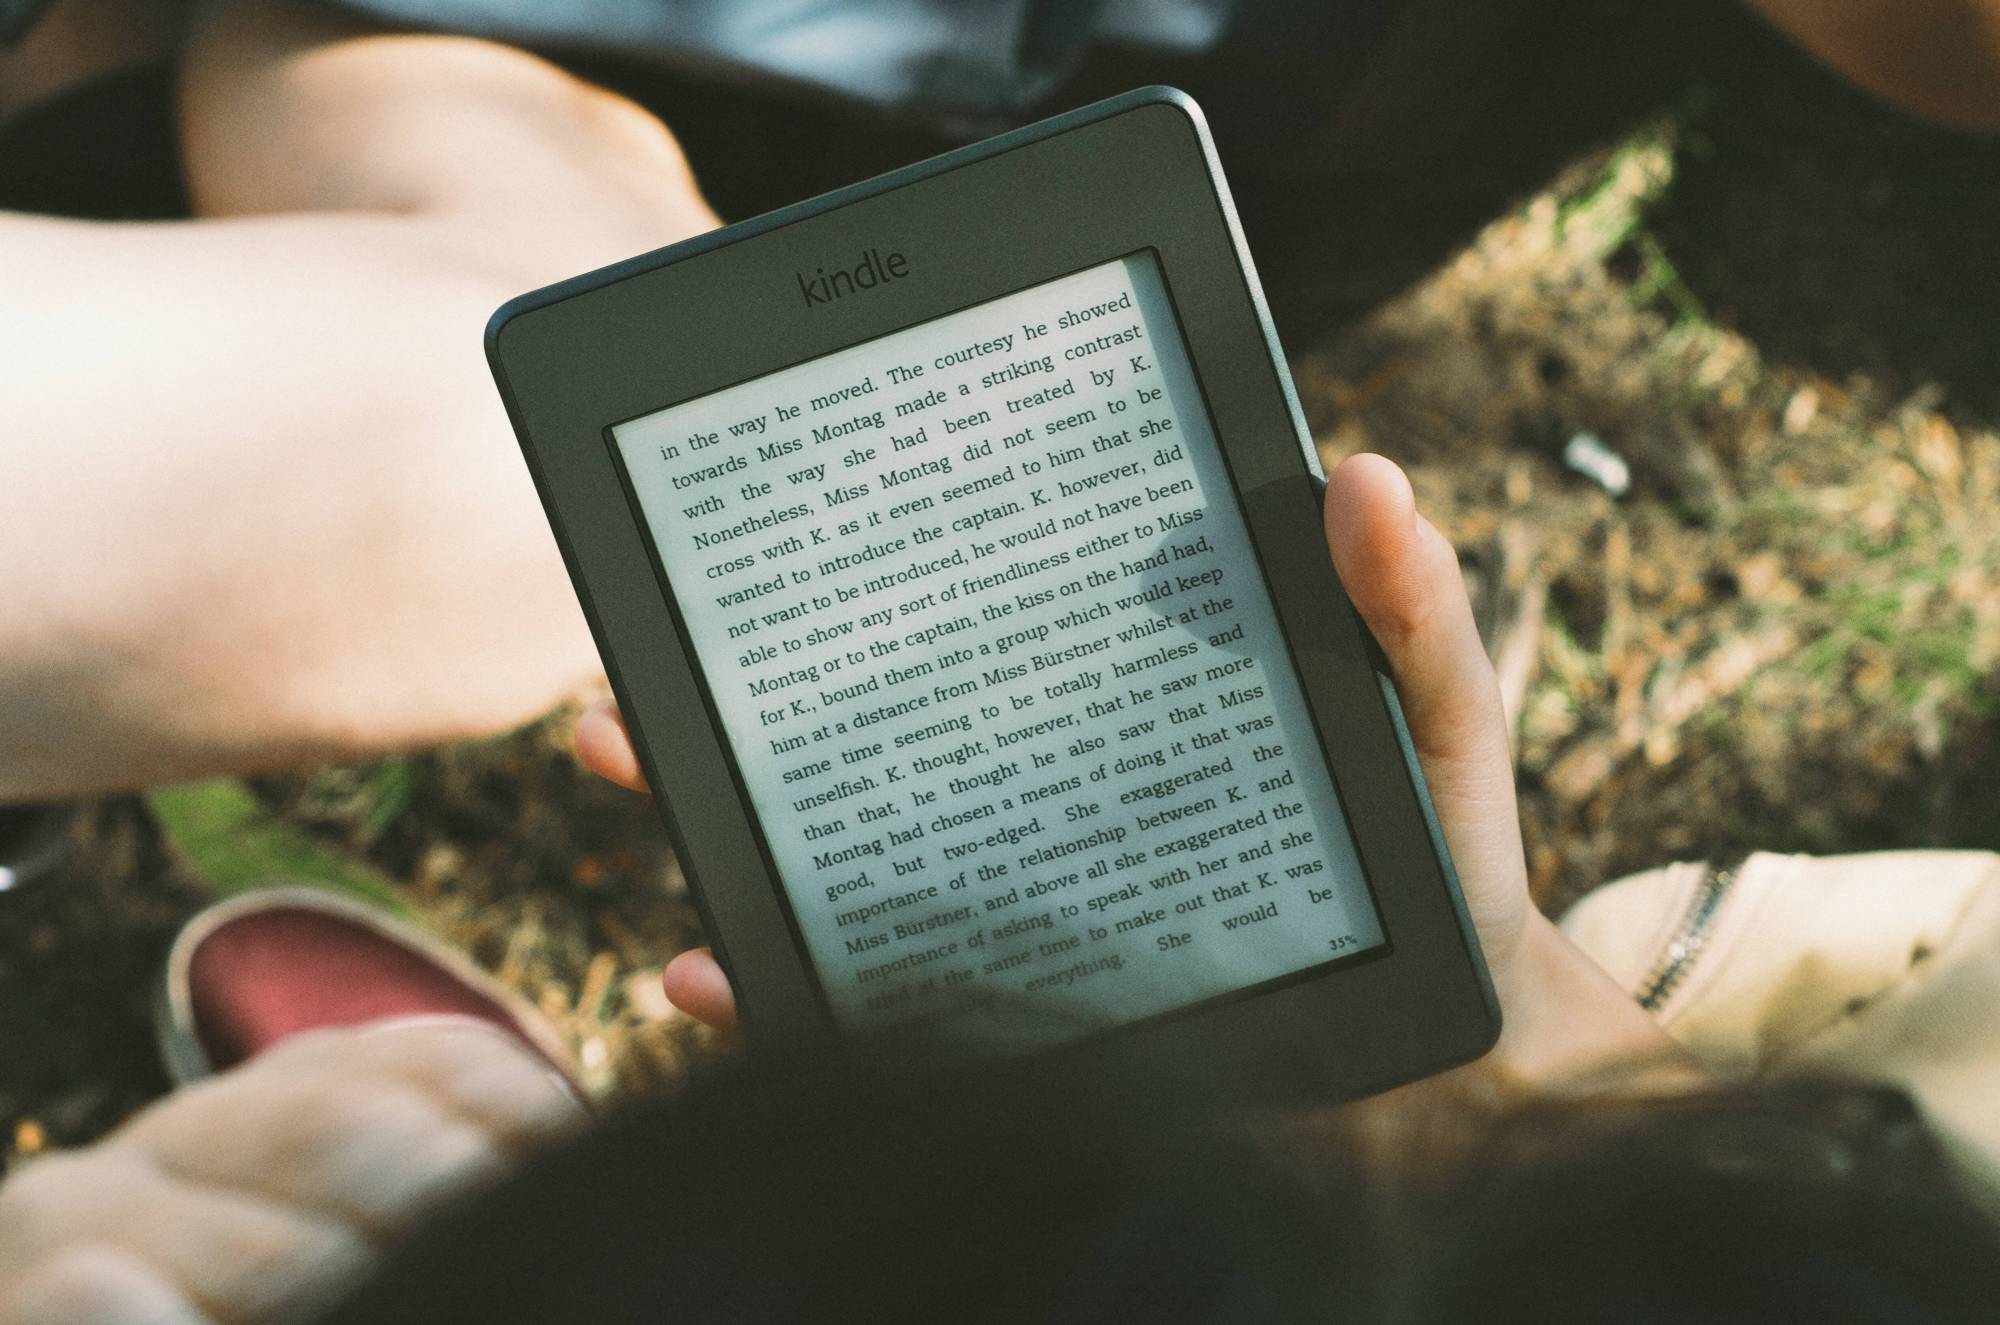 Challenges we face with ebooks